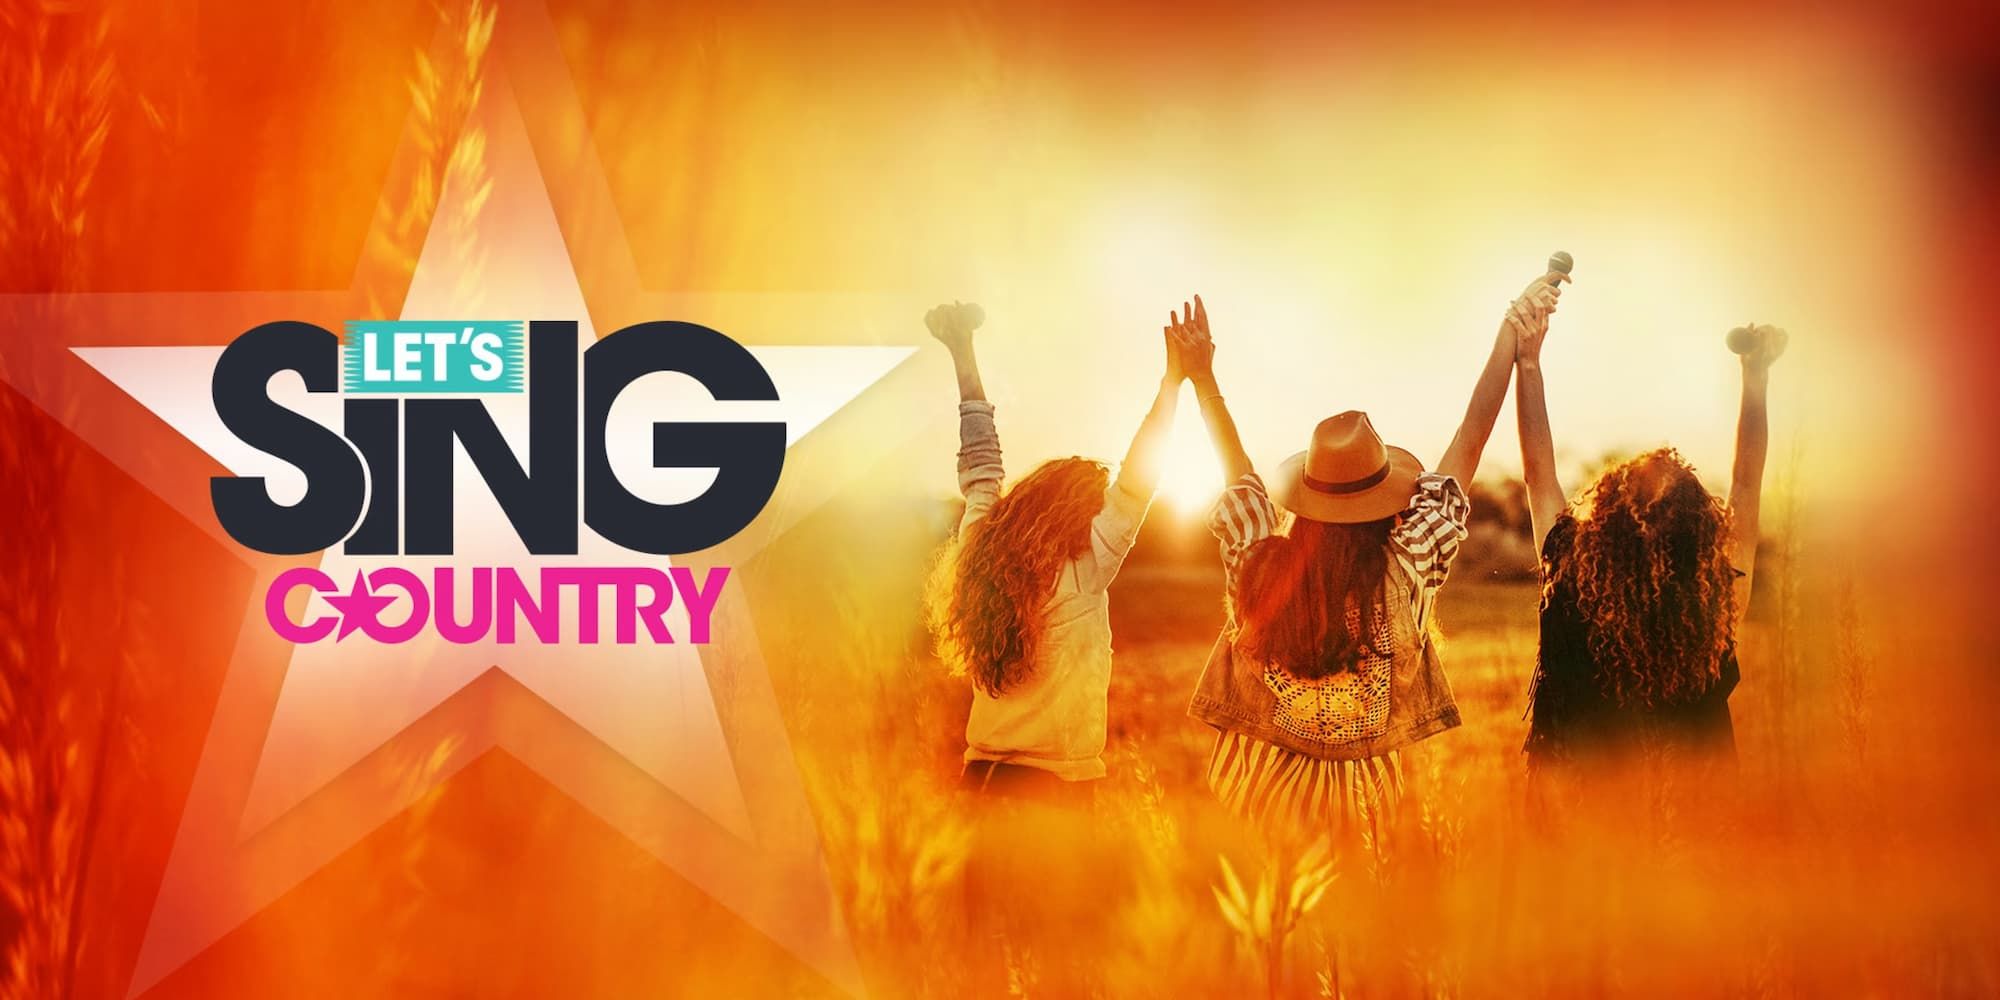 Three women raise their arms in a field for the promo image of Let's Sing Country.